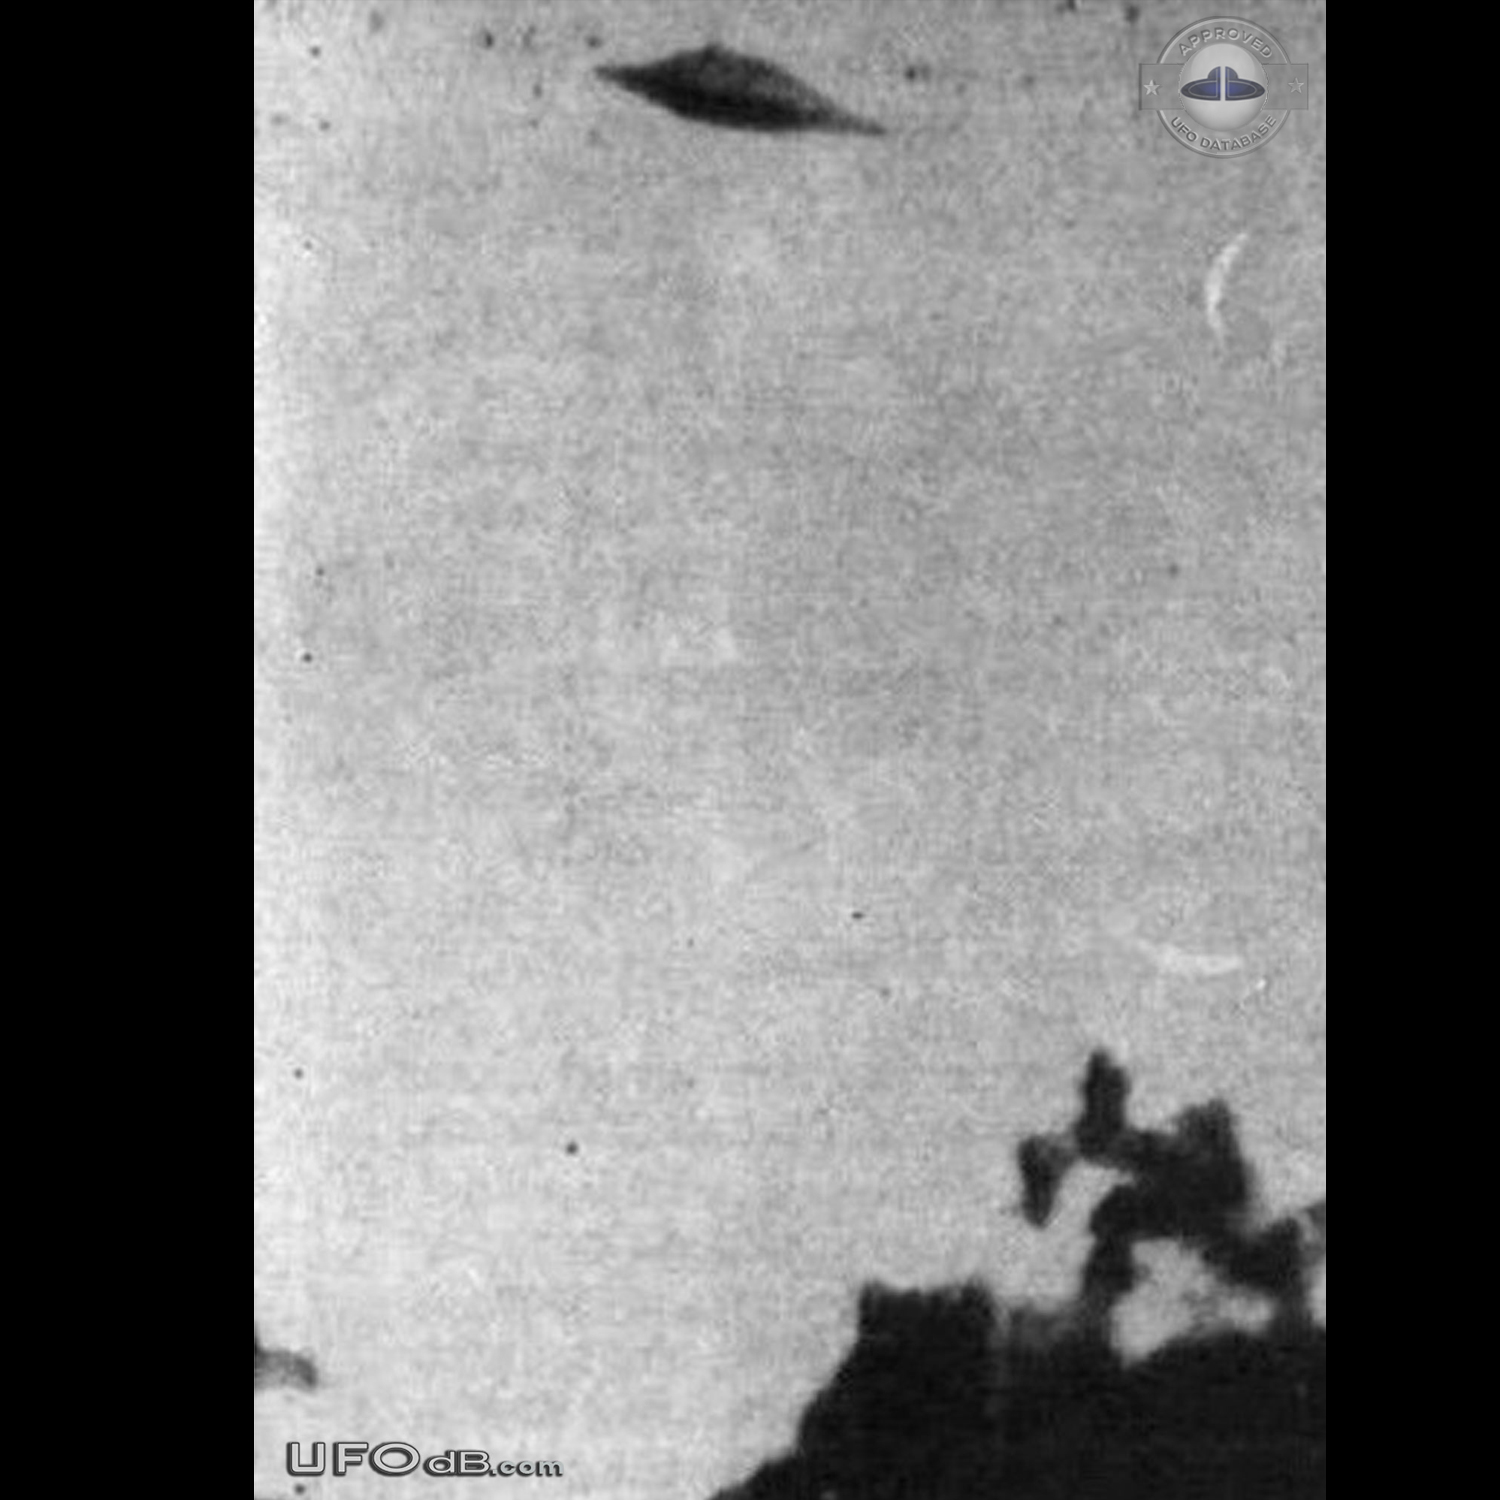 Old 1978 double Saucer UFO picture from Renalegh, Buenos Aires UFO Picture #491-1